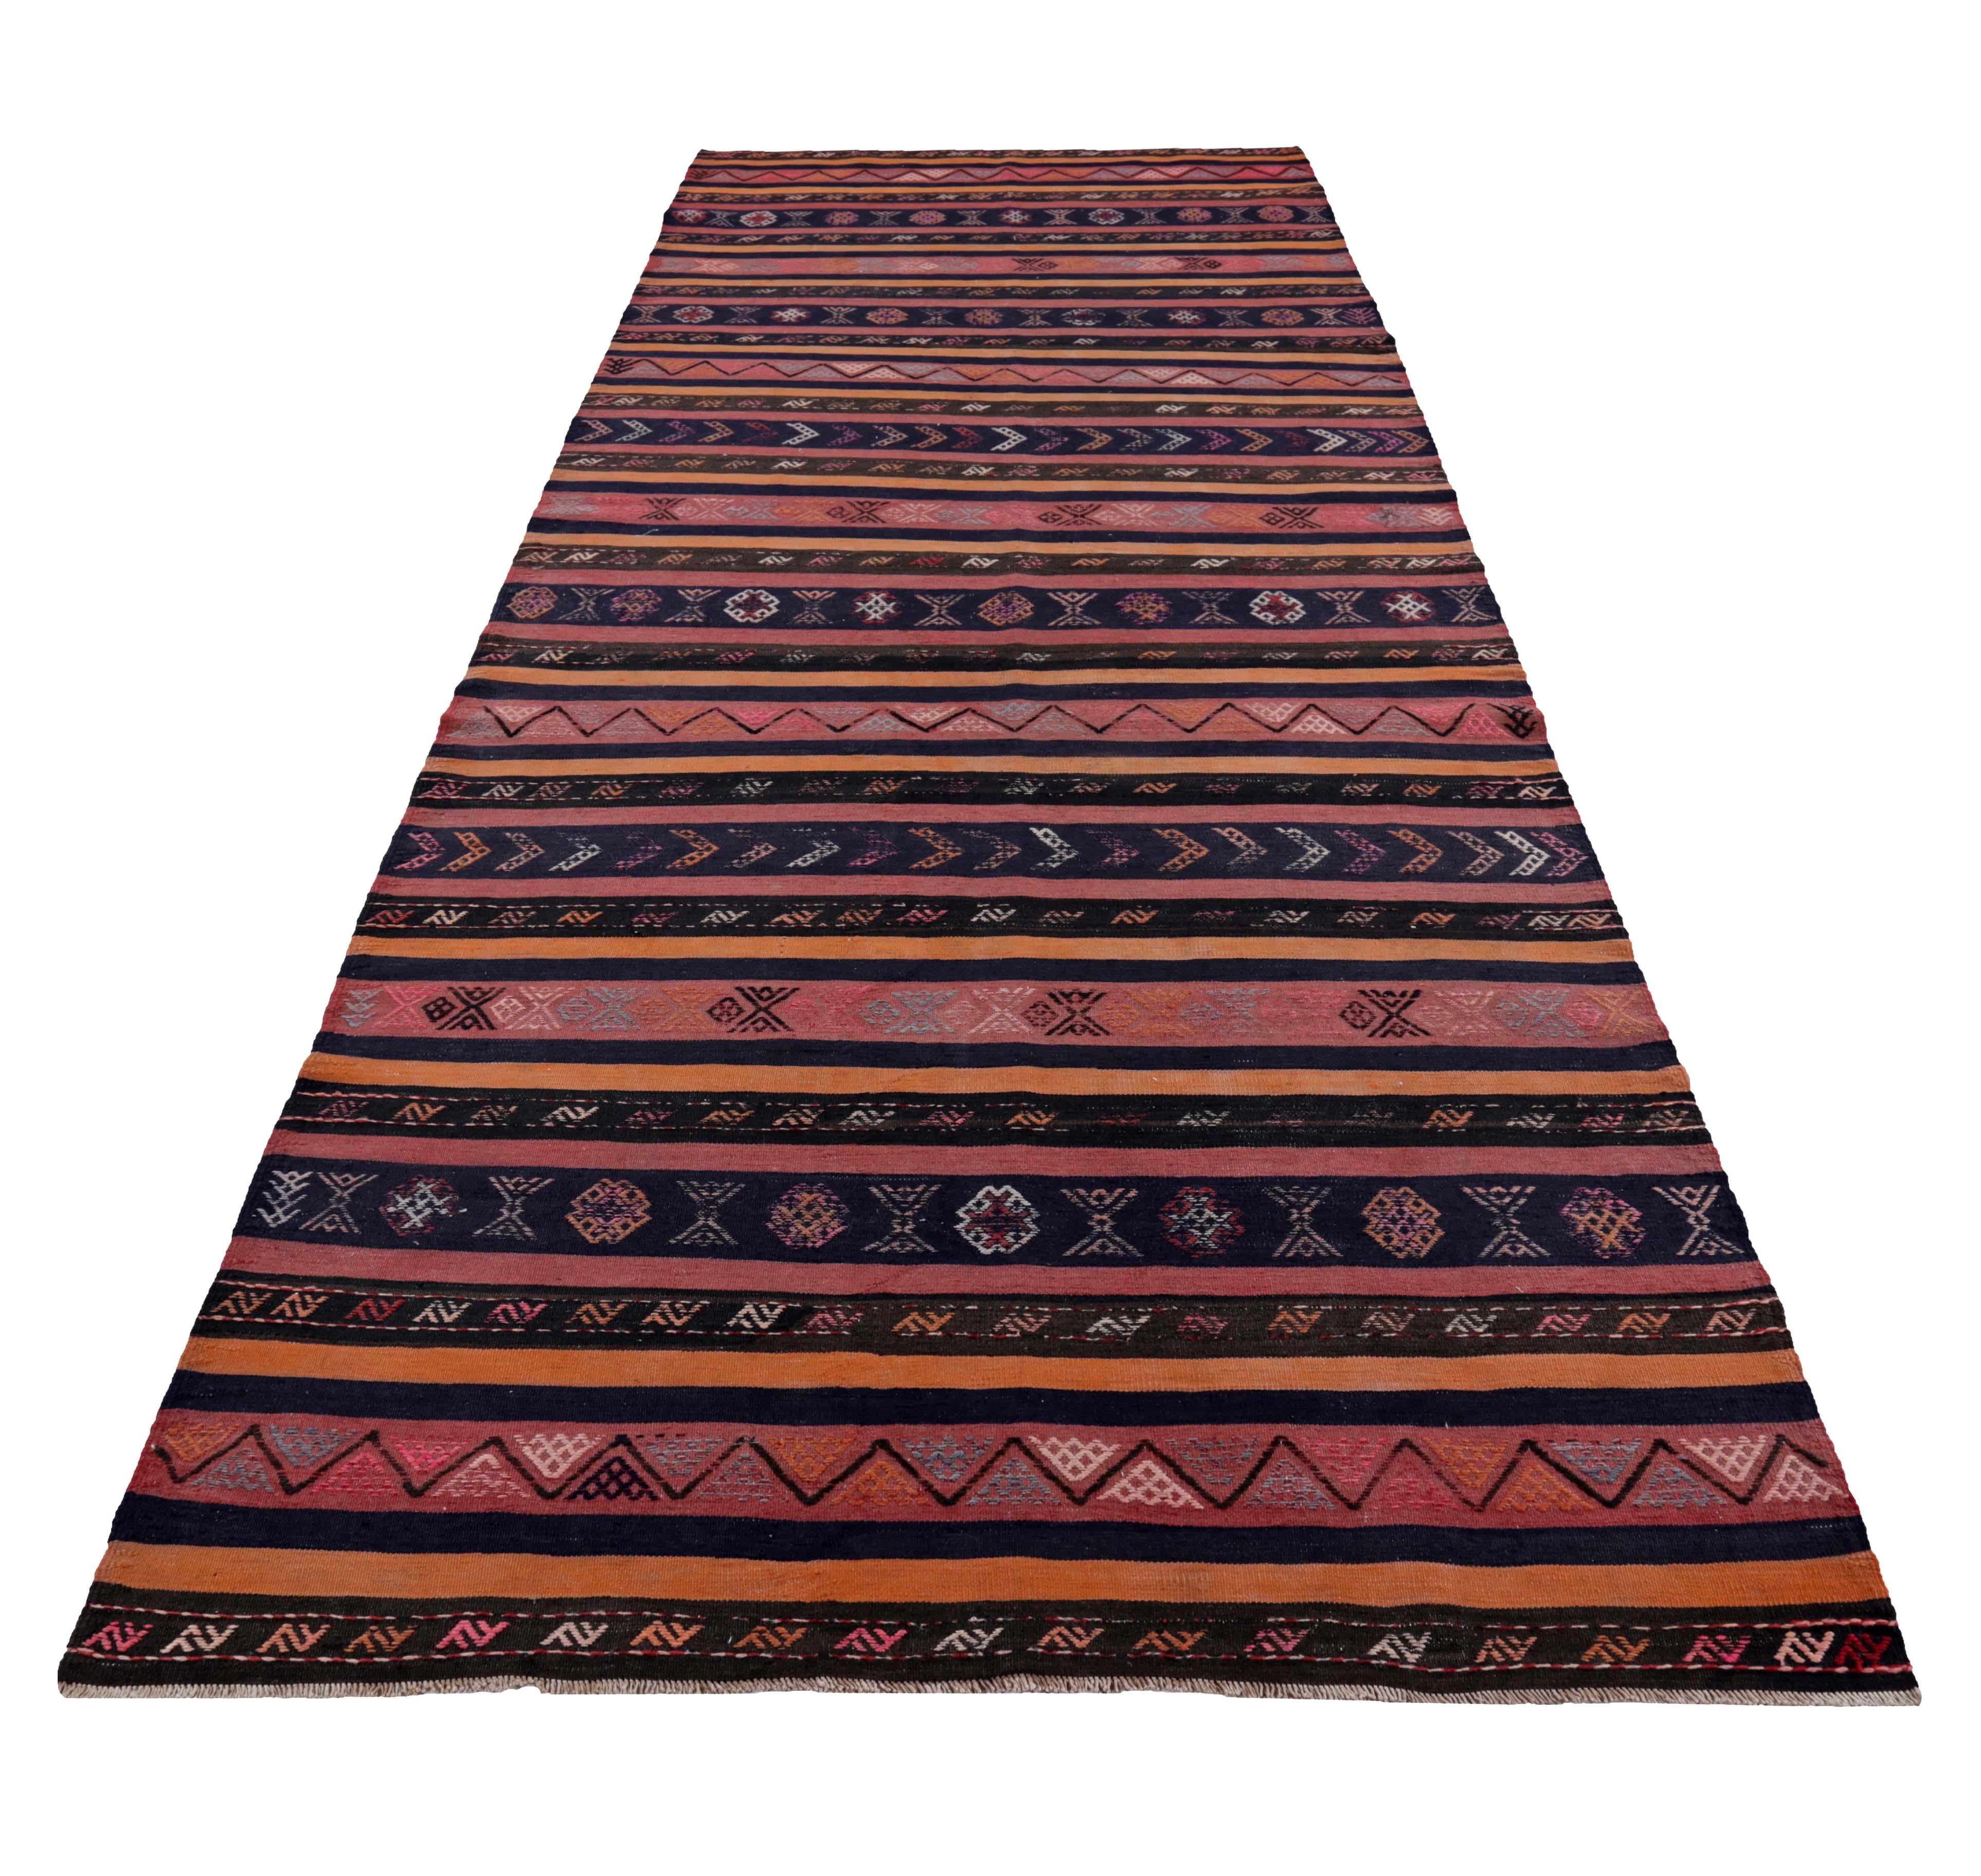 Turkish rug handwoven from the finest sheep’s wool and colored with all-natural vegetable dyes that are safe for humans and pets. It’s a traditional Kilim flat-weave design featuring orange, blue, red and black diamond patterns. It’s a stunning